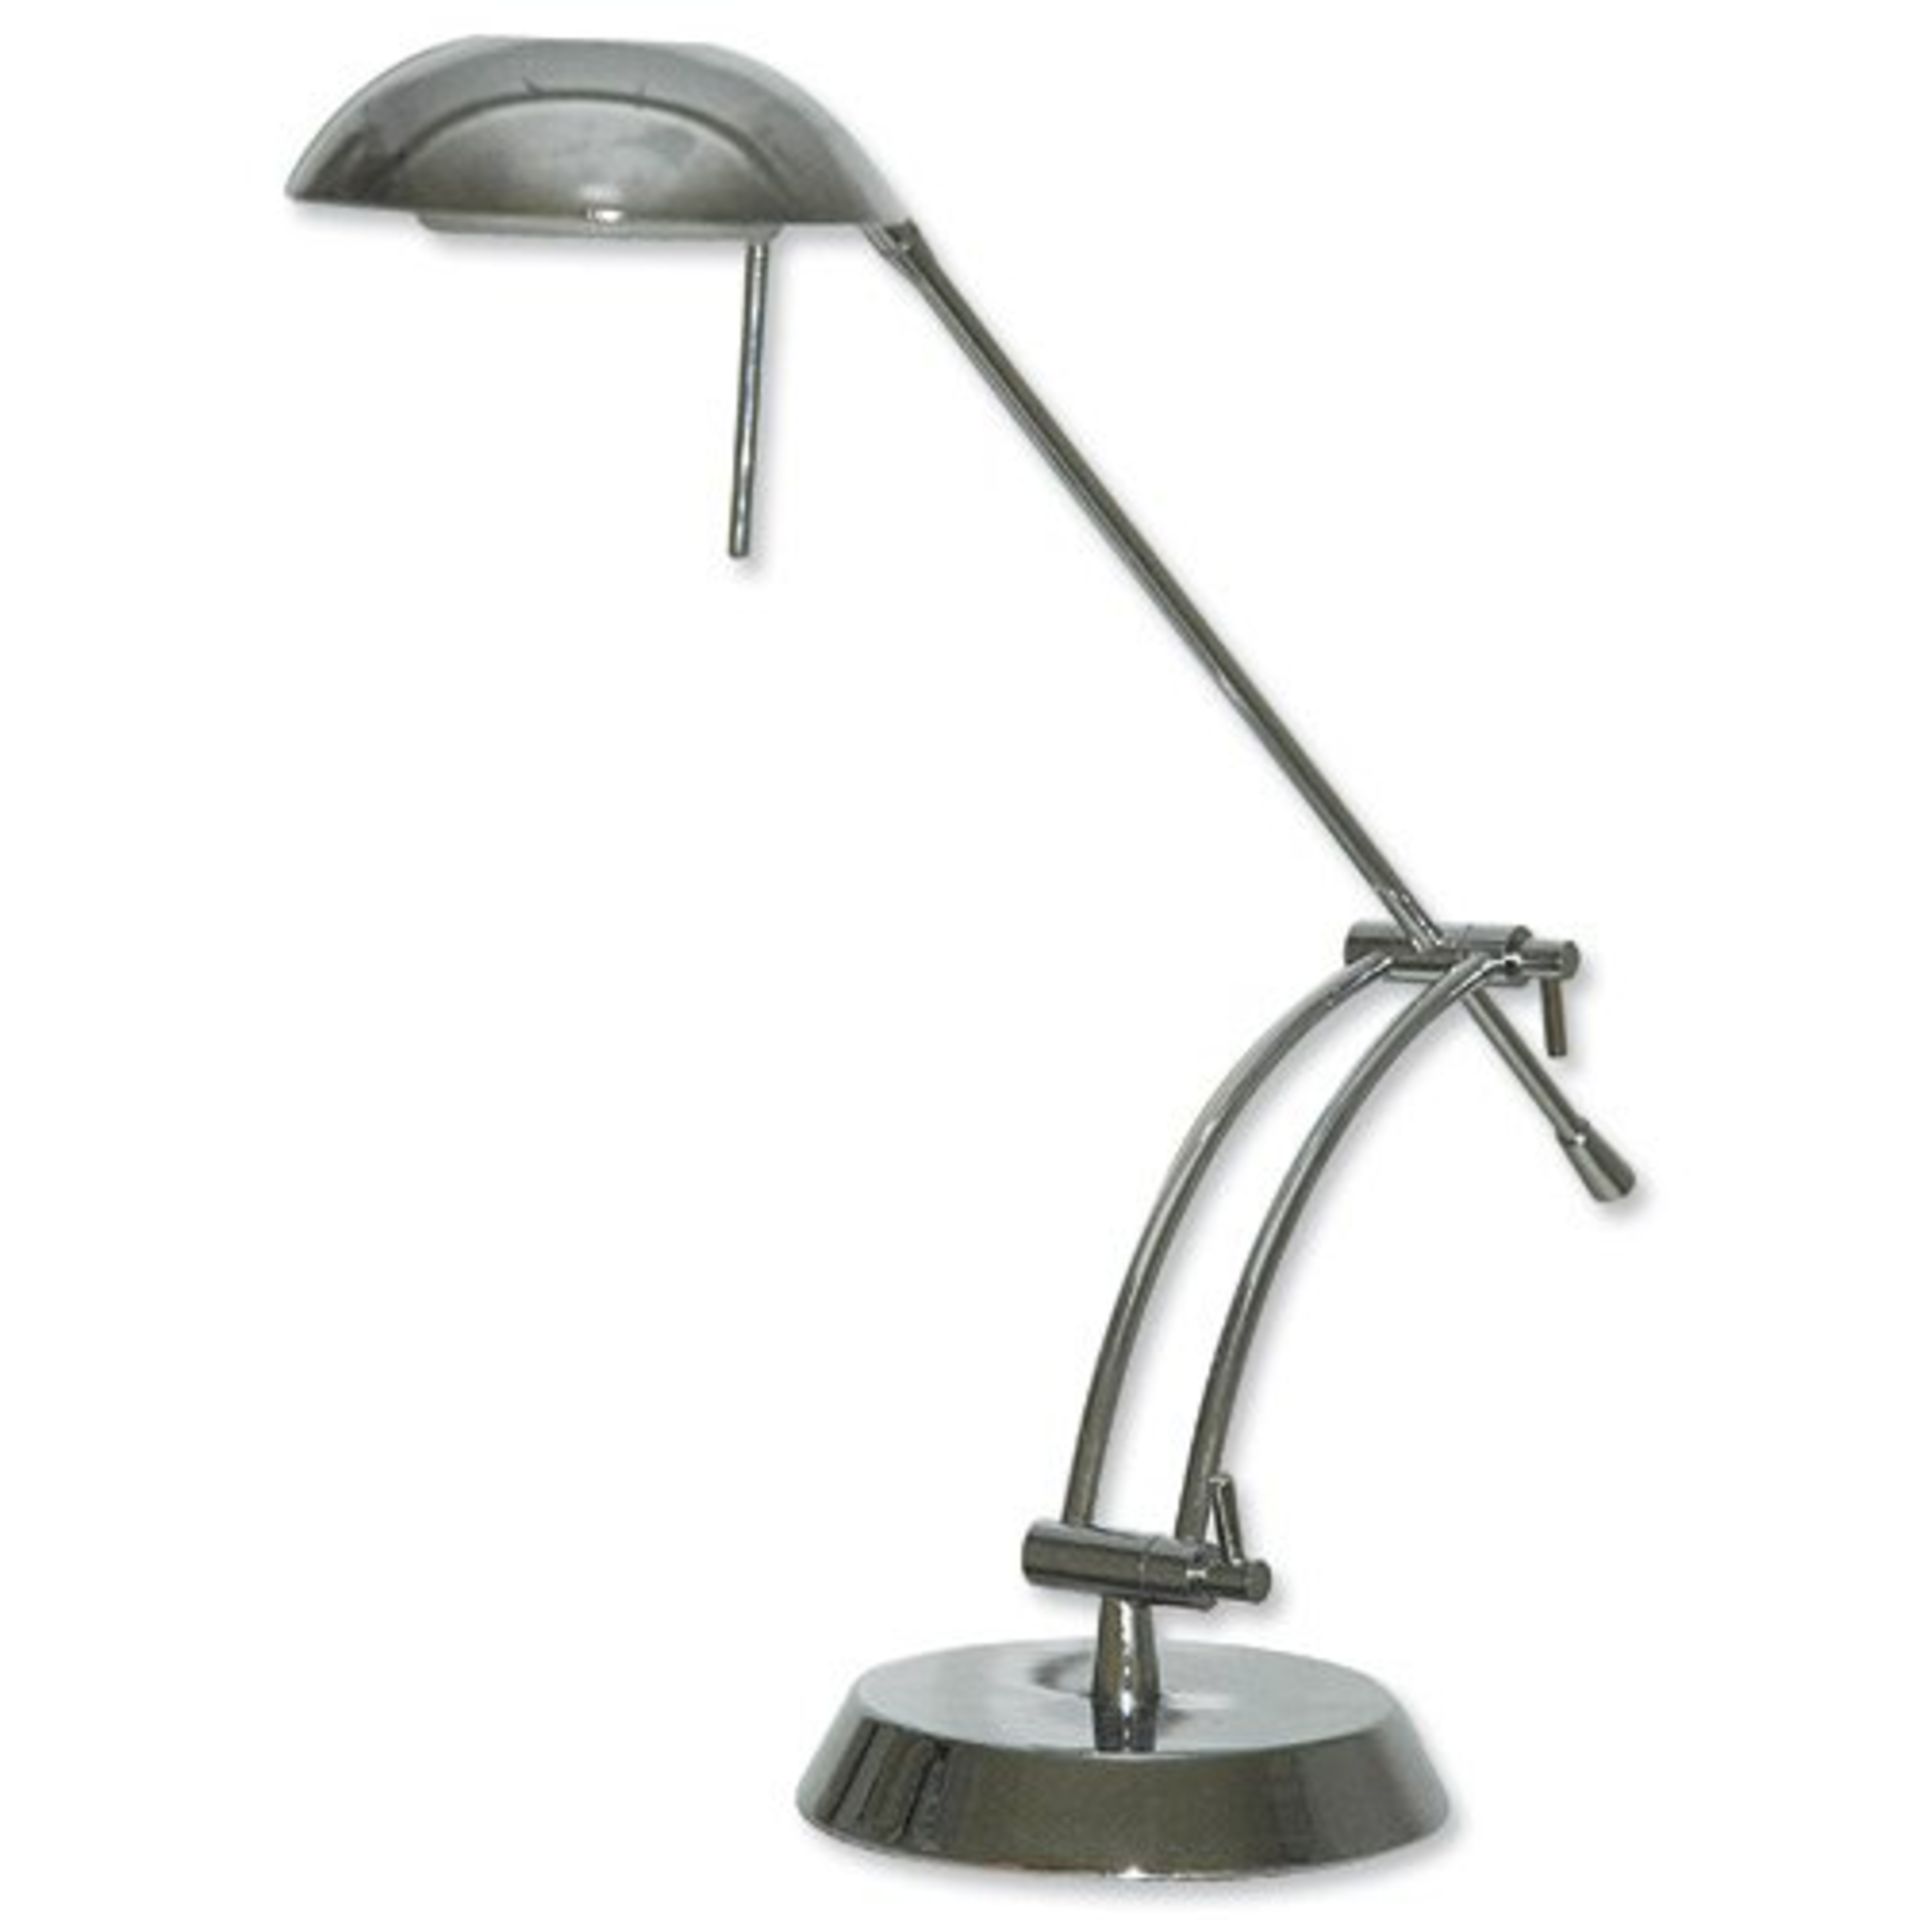 1 x Idelec Task Lamp Low Energy 9W Lamp Chrome Ref 8119T-01 - Brand New and Boxed (RRP £120.00)